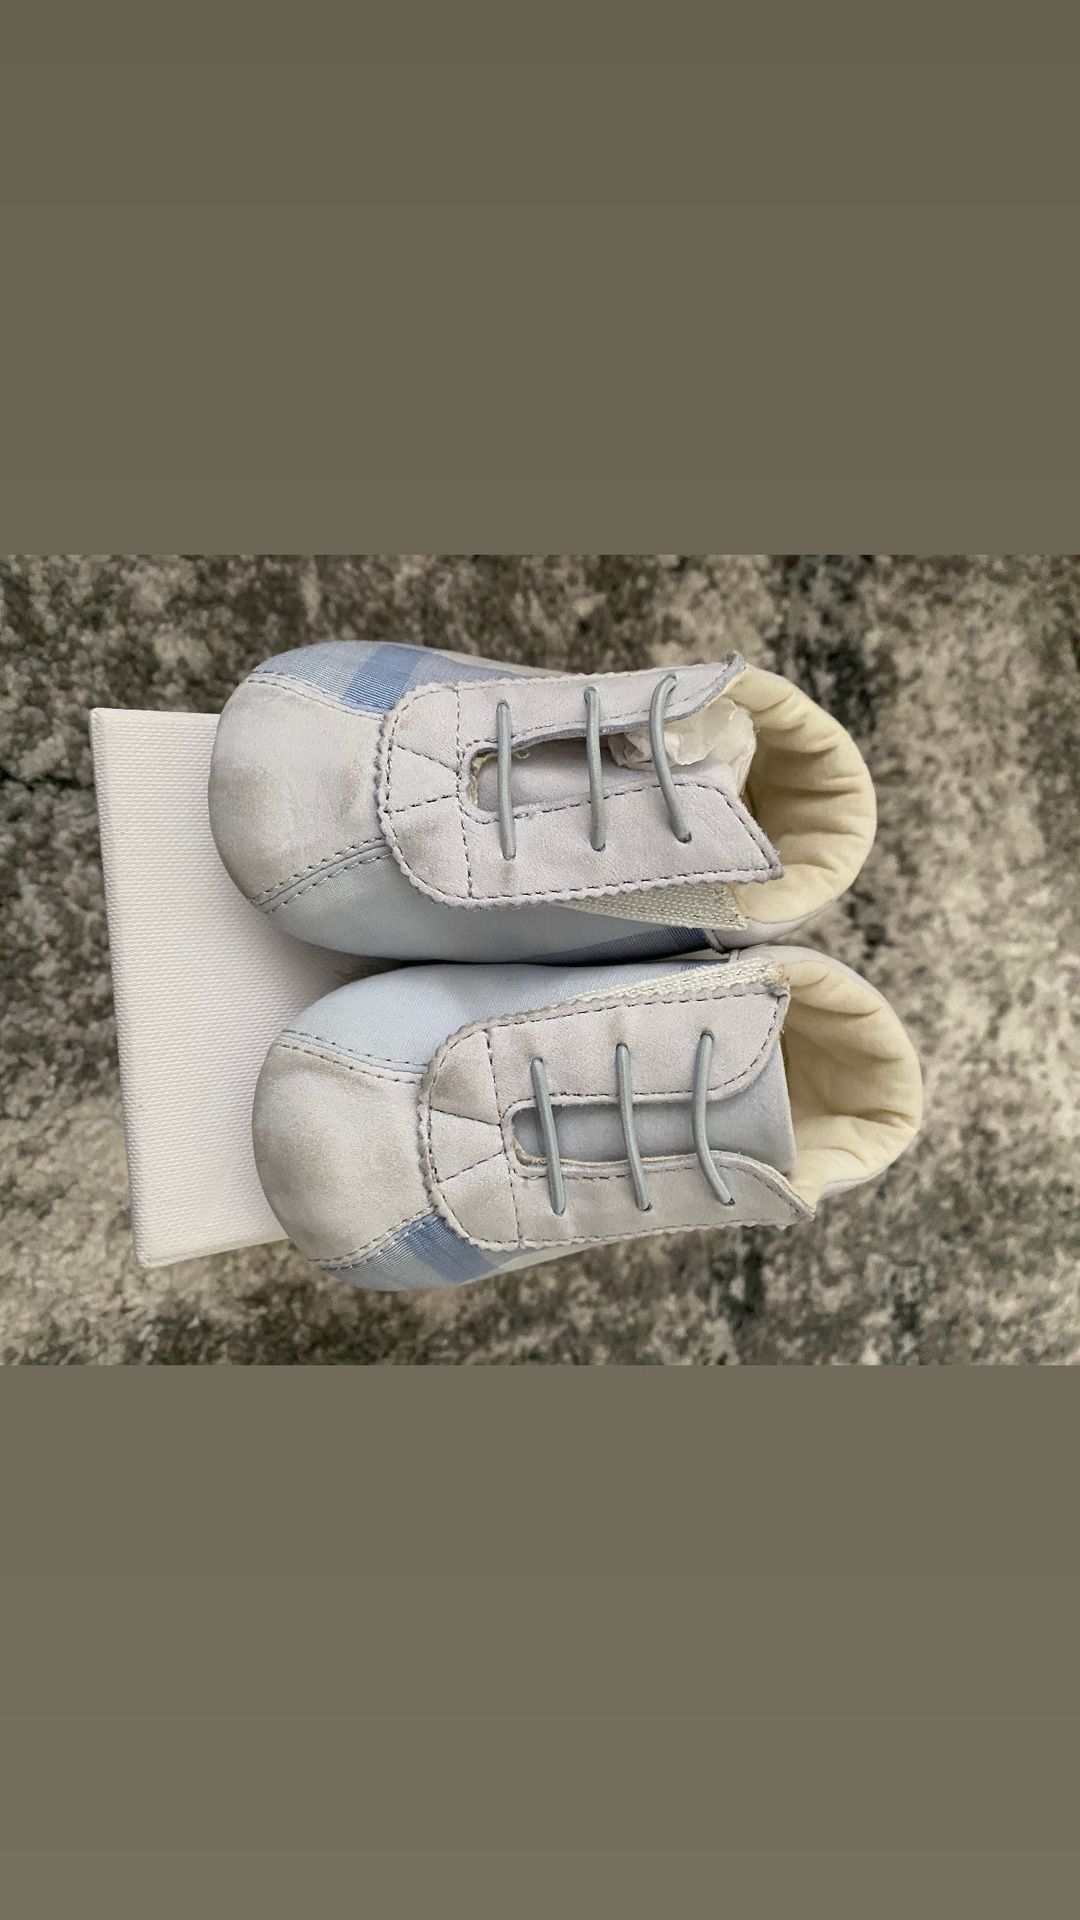 Burberry Infant Boys Checkered Shoes